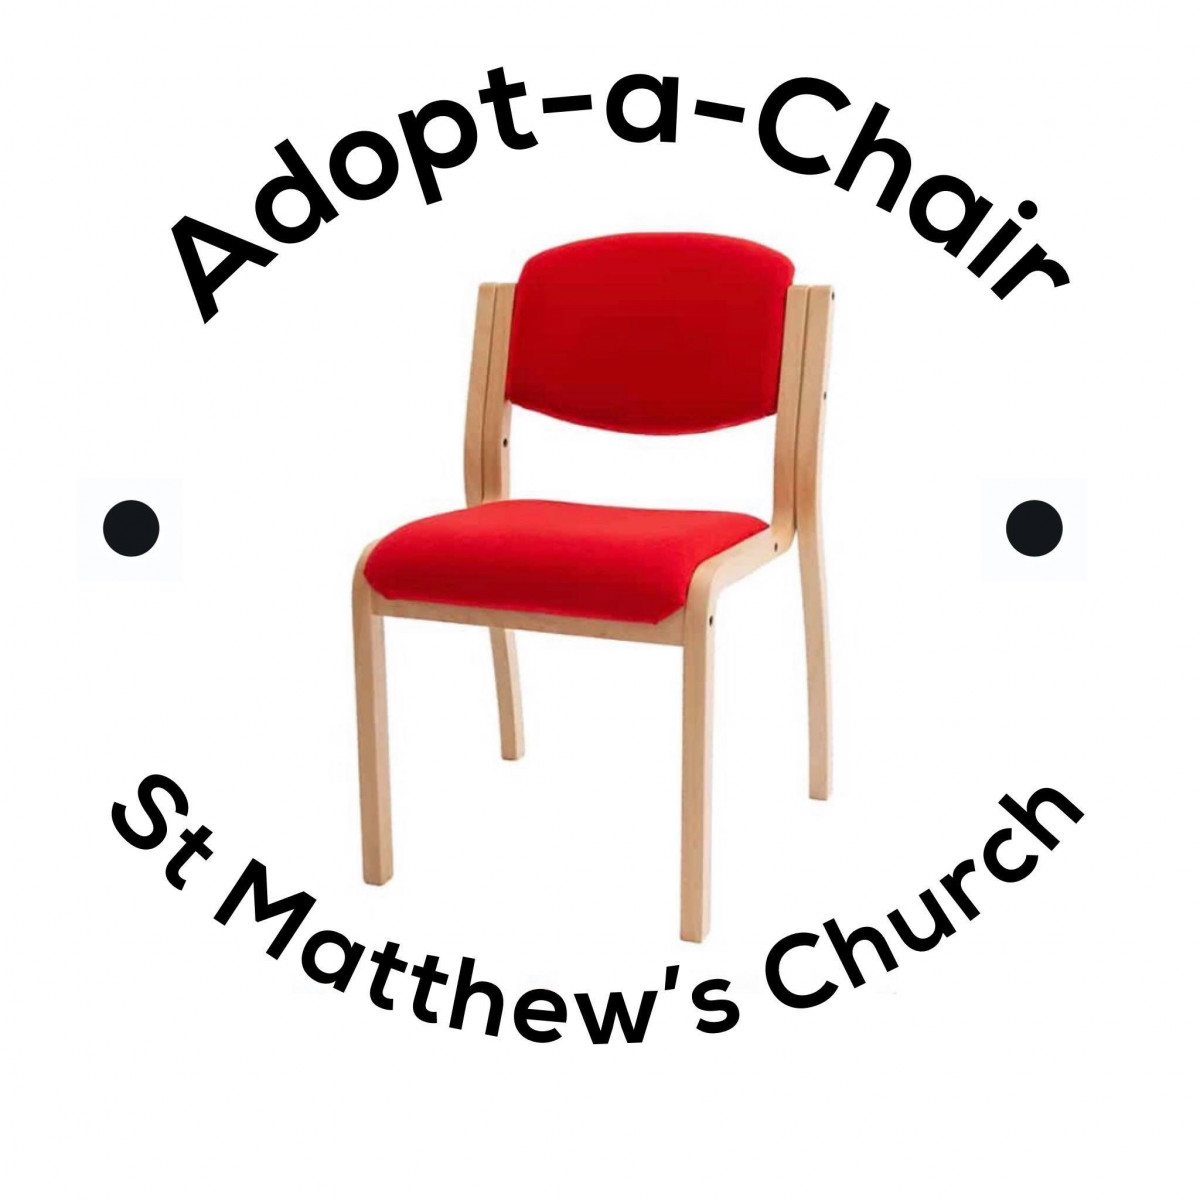 image of adopt a chair logo